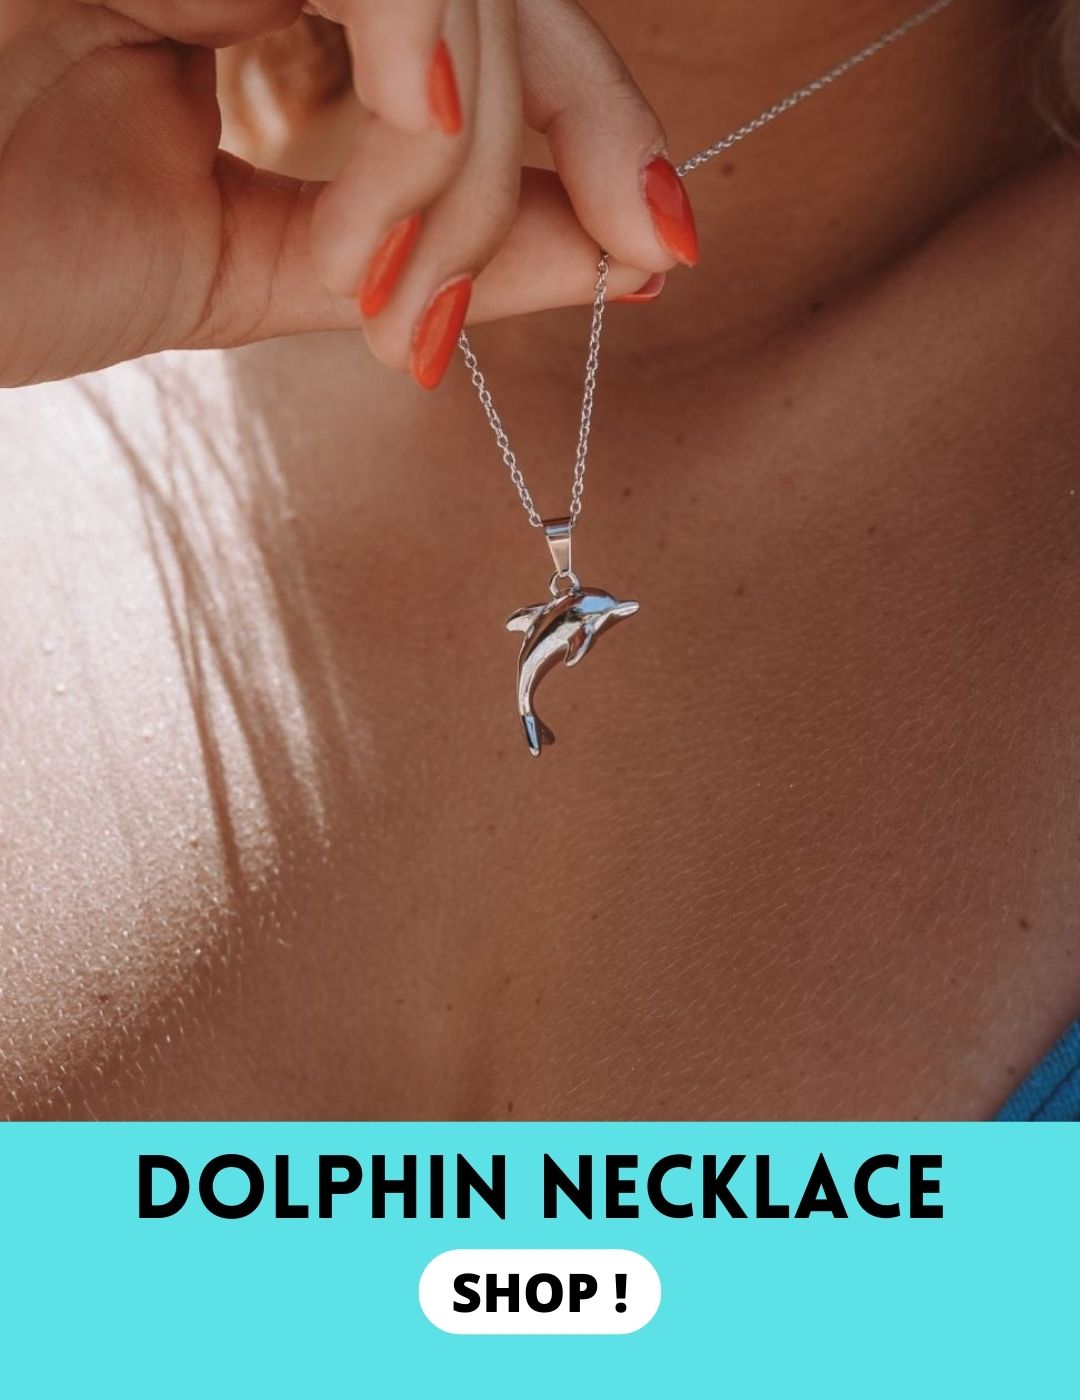 Interesting meaning of dolphin necklace